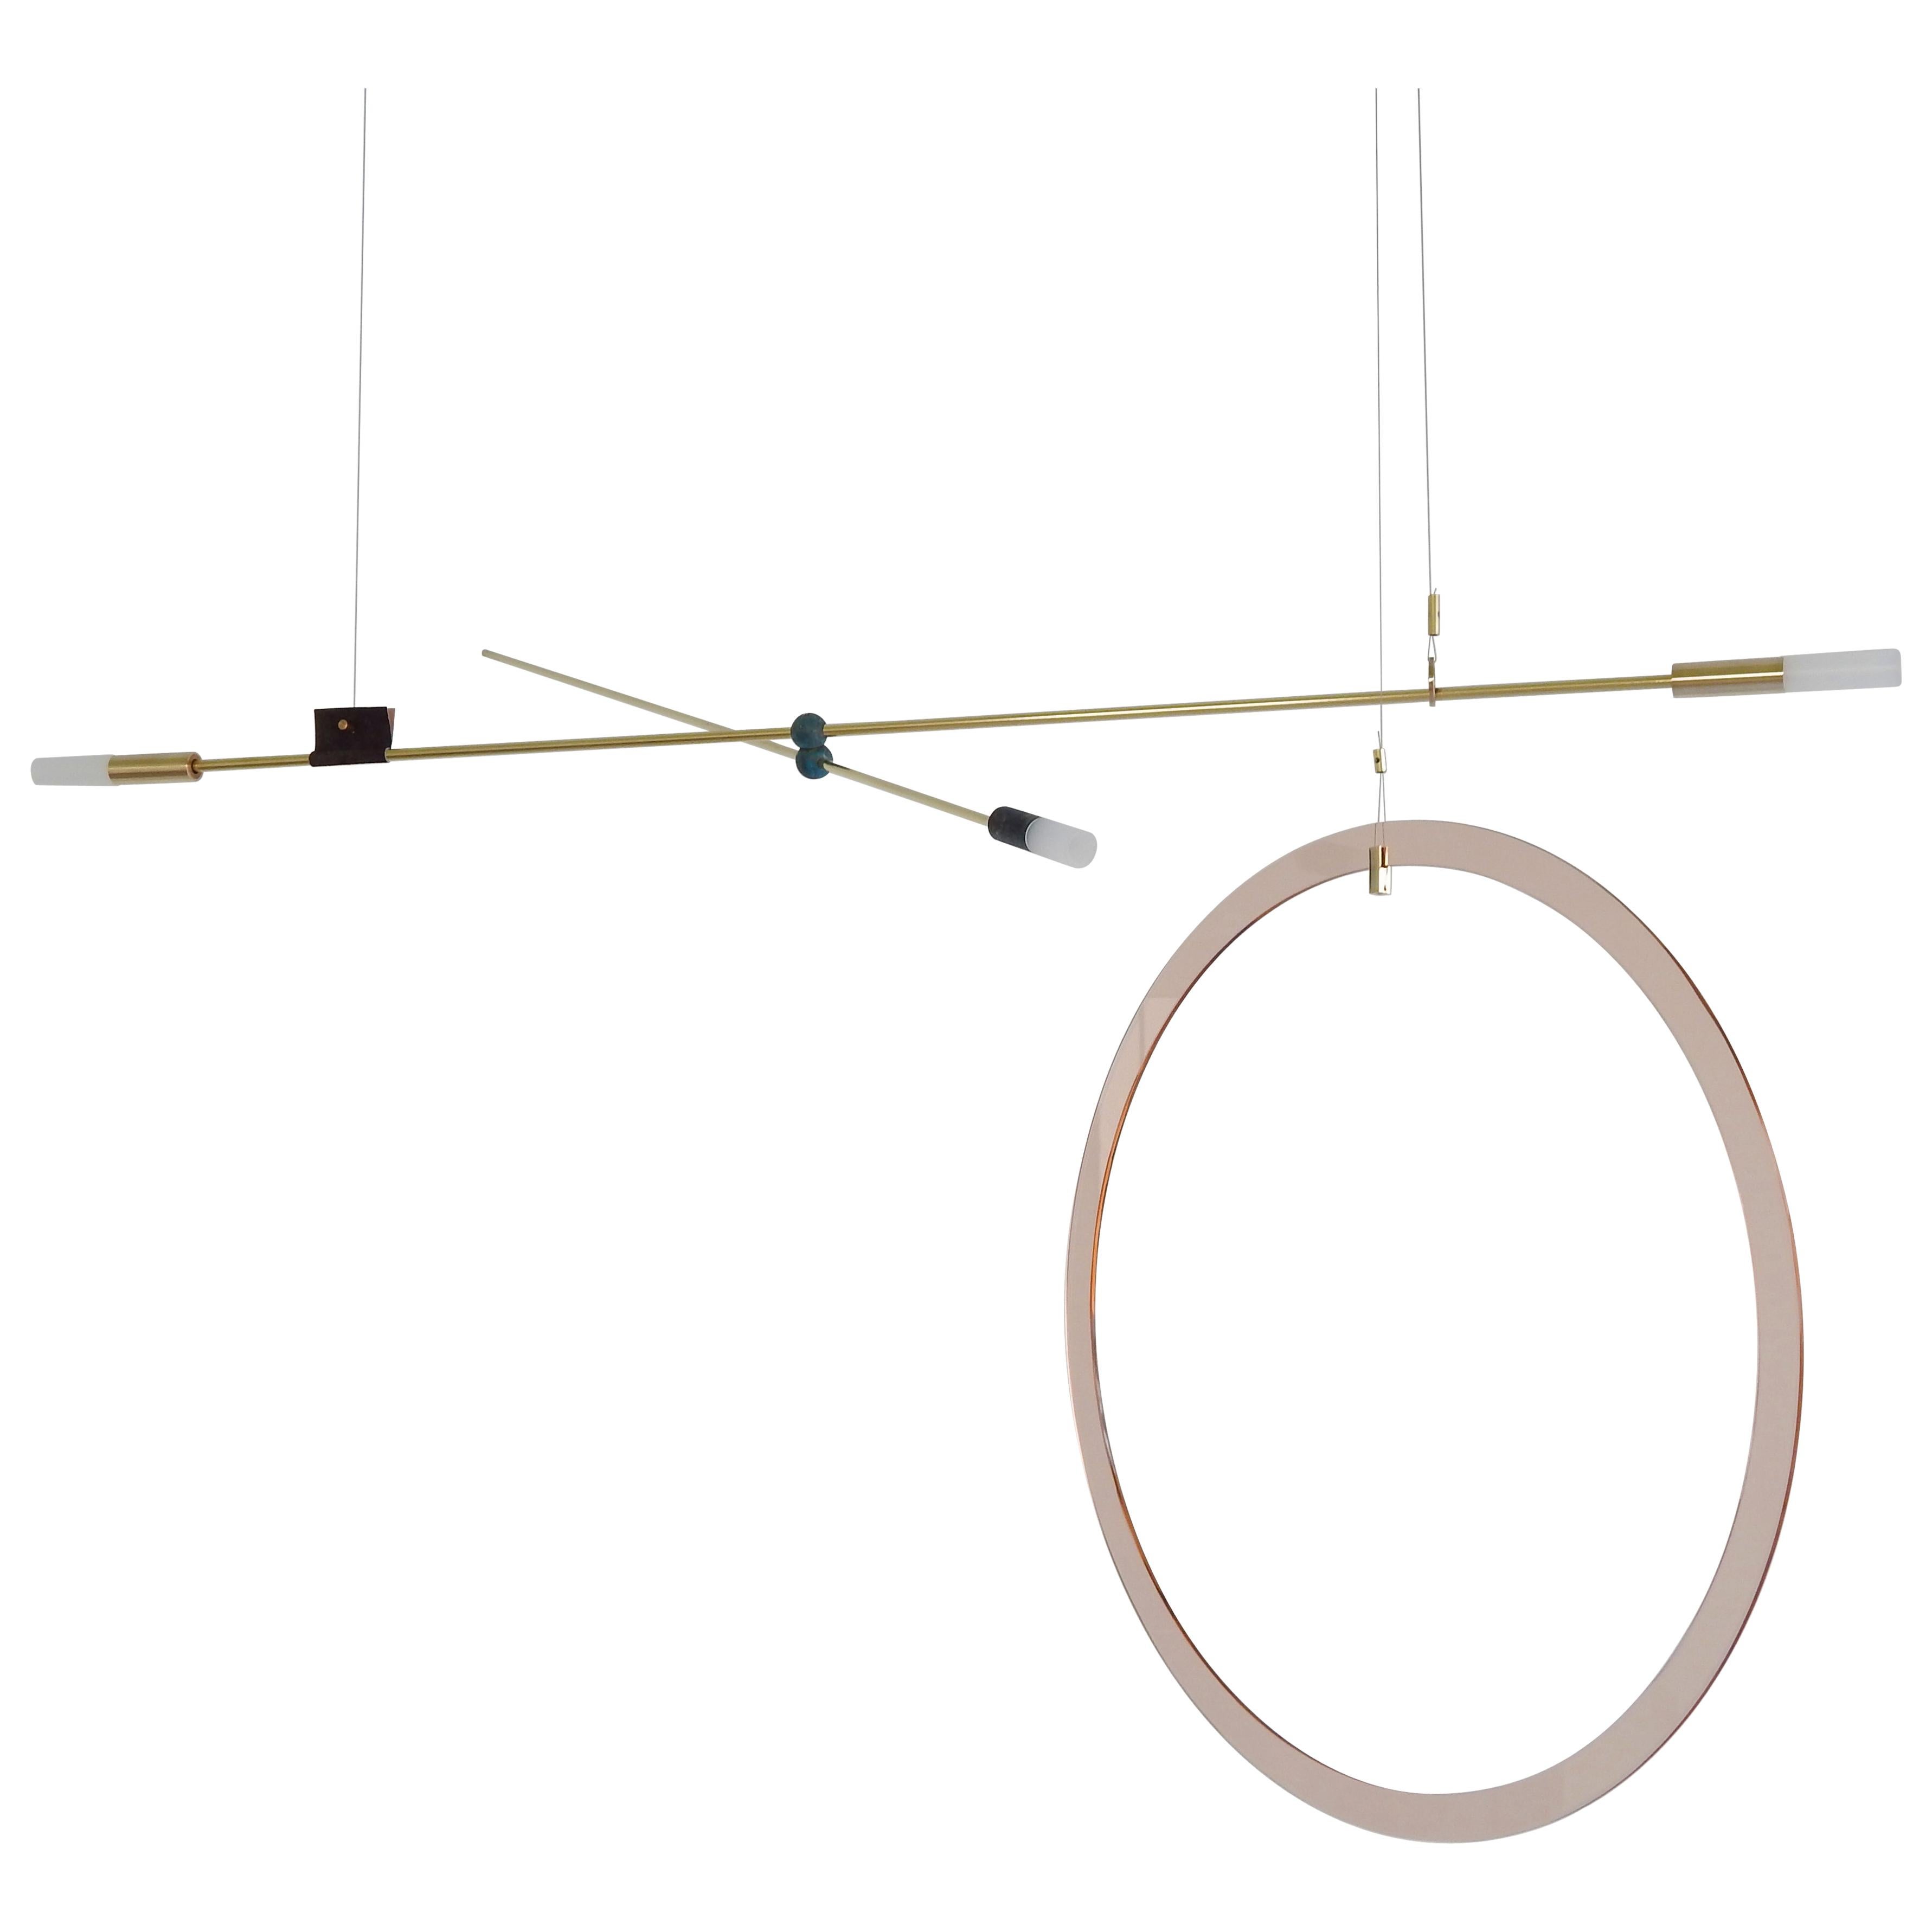 Sculptural Brass Light Pendant, Equilibrum by Periclis Frementitis